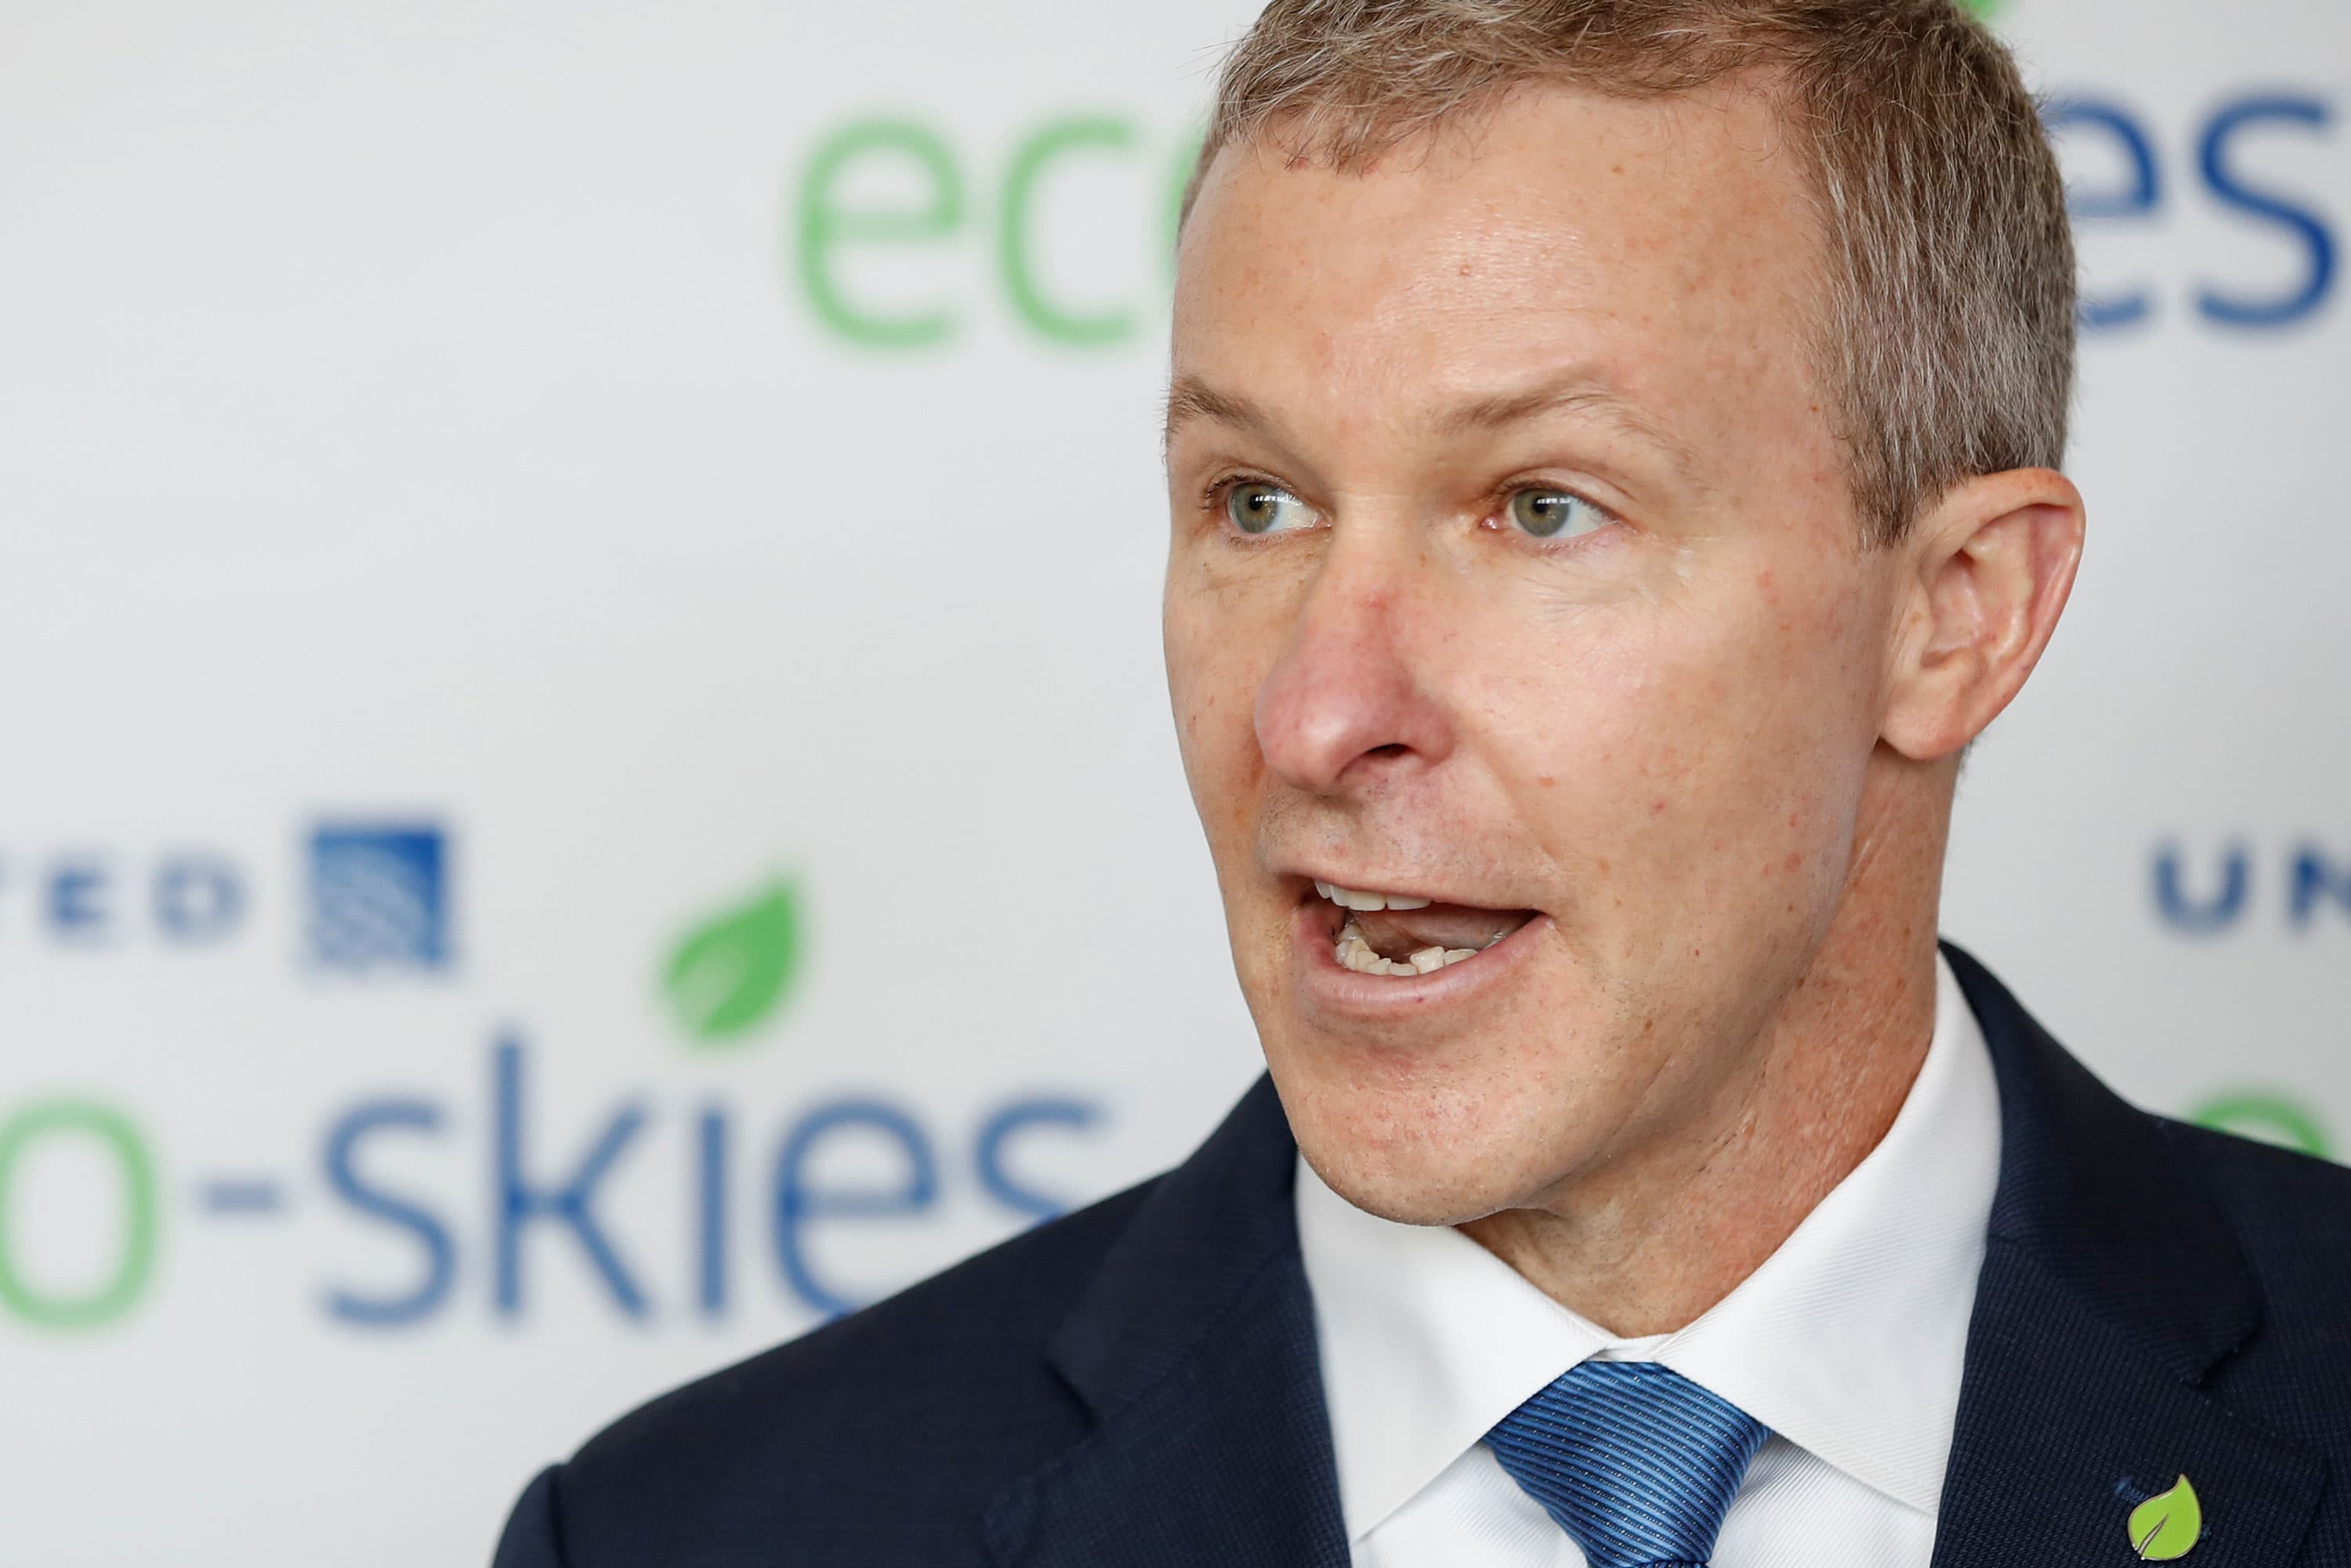 United CEO says air travel demand will roar back once there's a coronavirus vaccine - CNBC